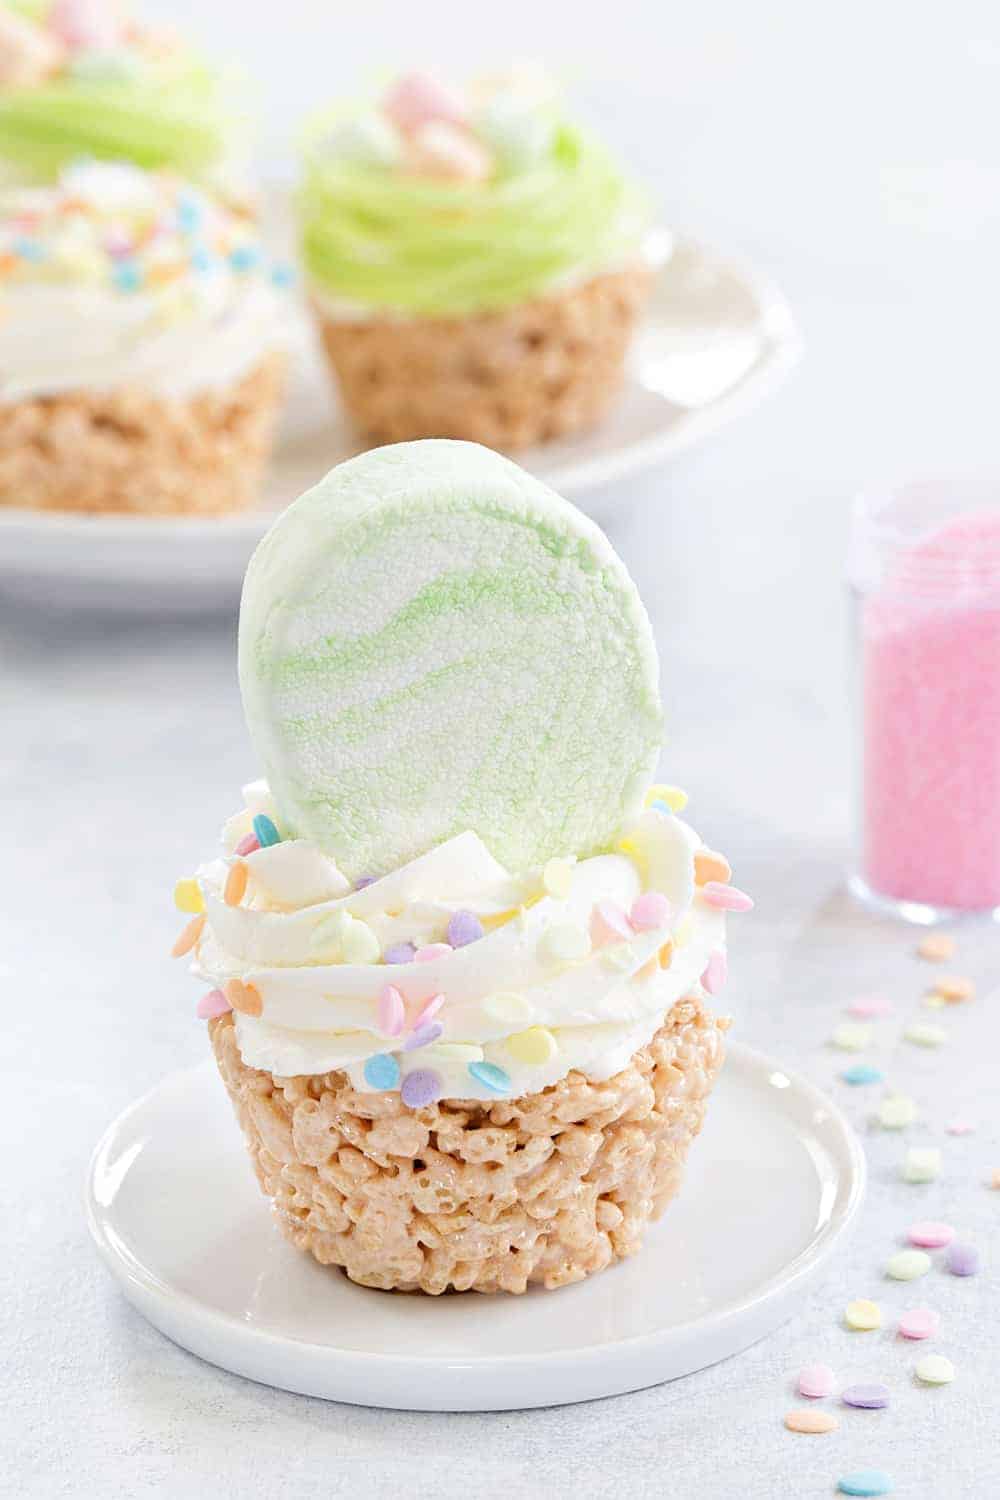 Marshmallow Treat Cupcakes are an adorable and delicious addition to any spring party! Festive sprinkles and colorful marshmallows make them extra special